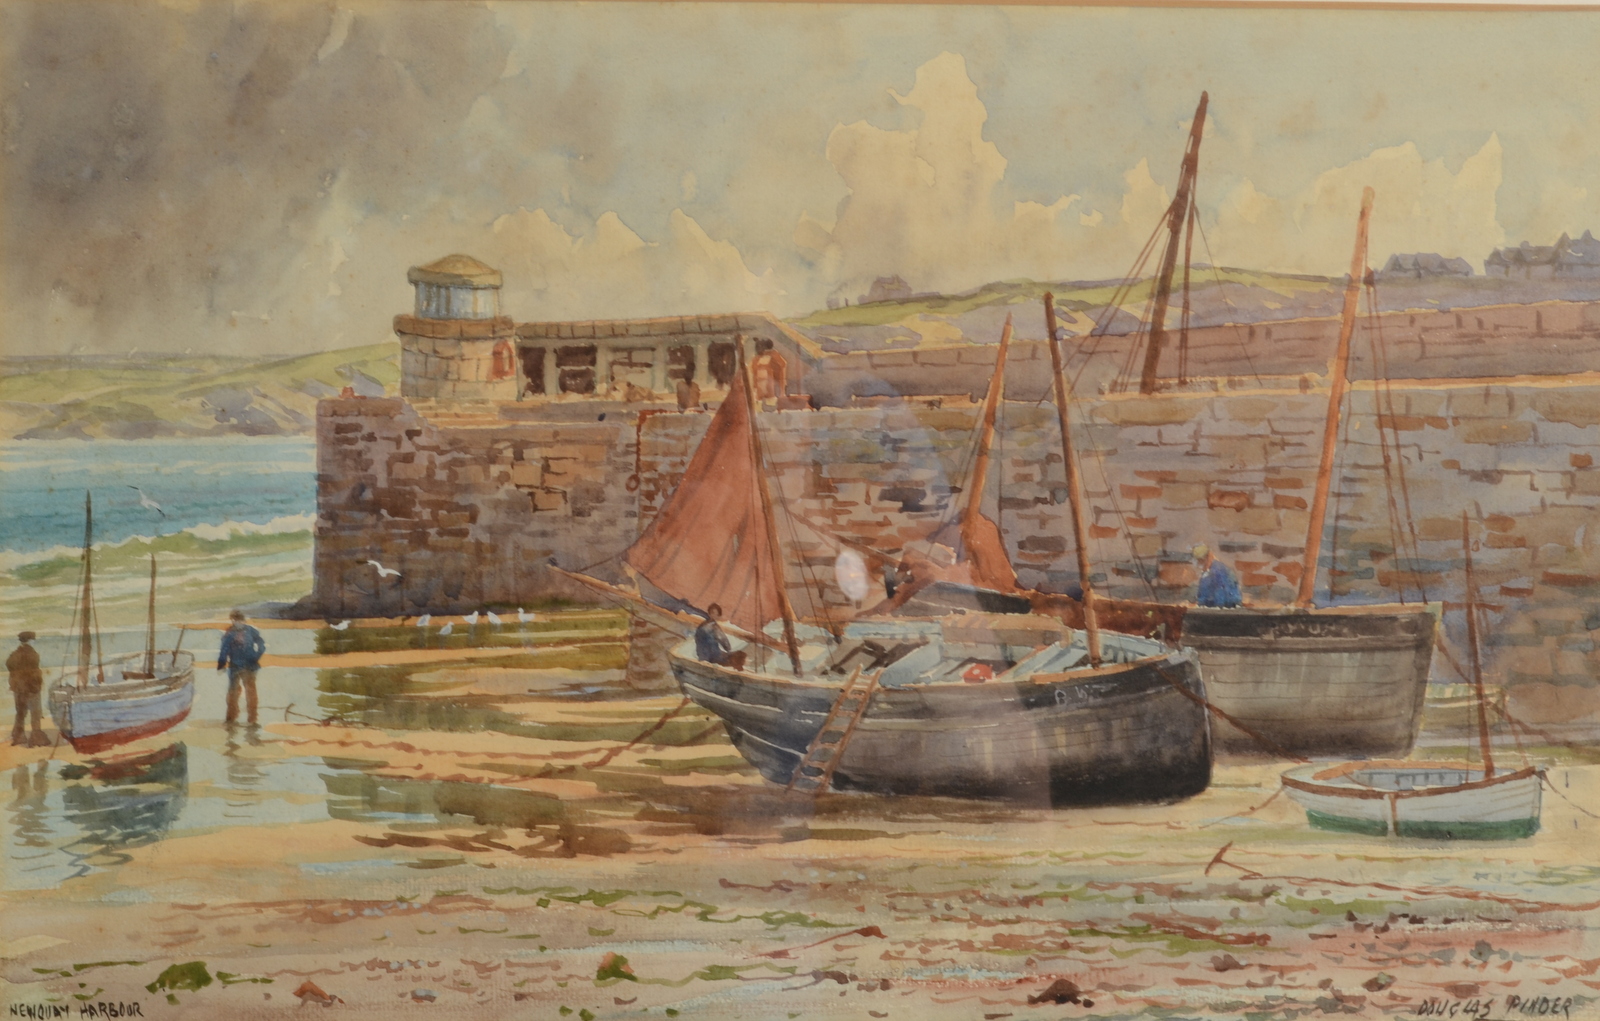 DOUGLAS PINDER Newquay Harbour Watercolour Signed and inscribed 29 x 46cm